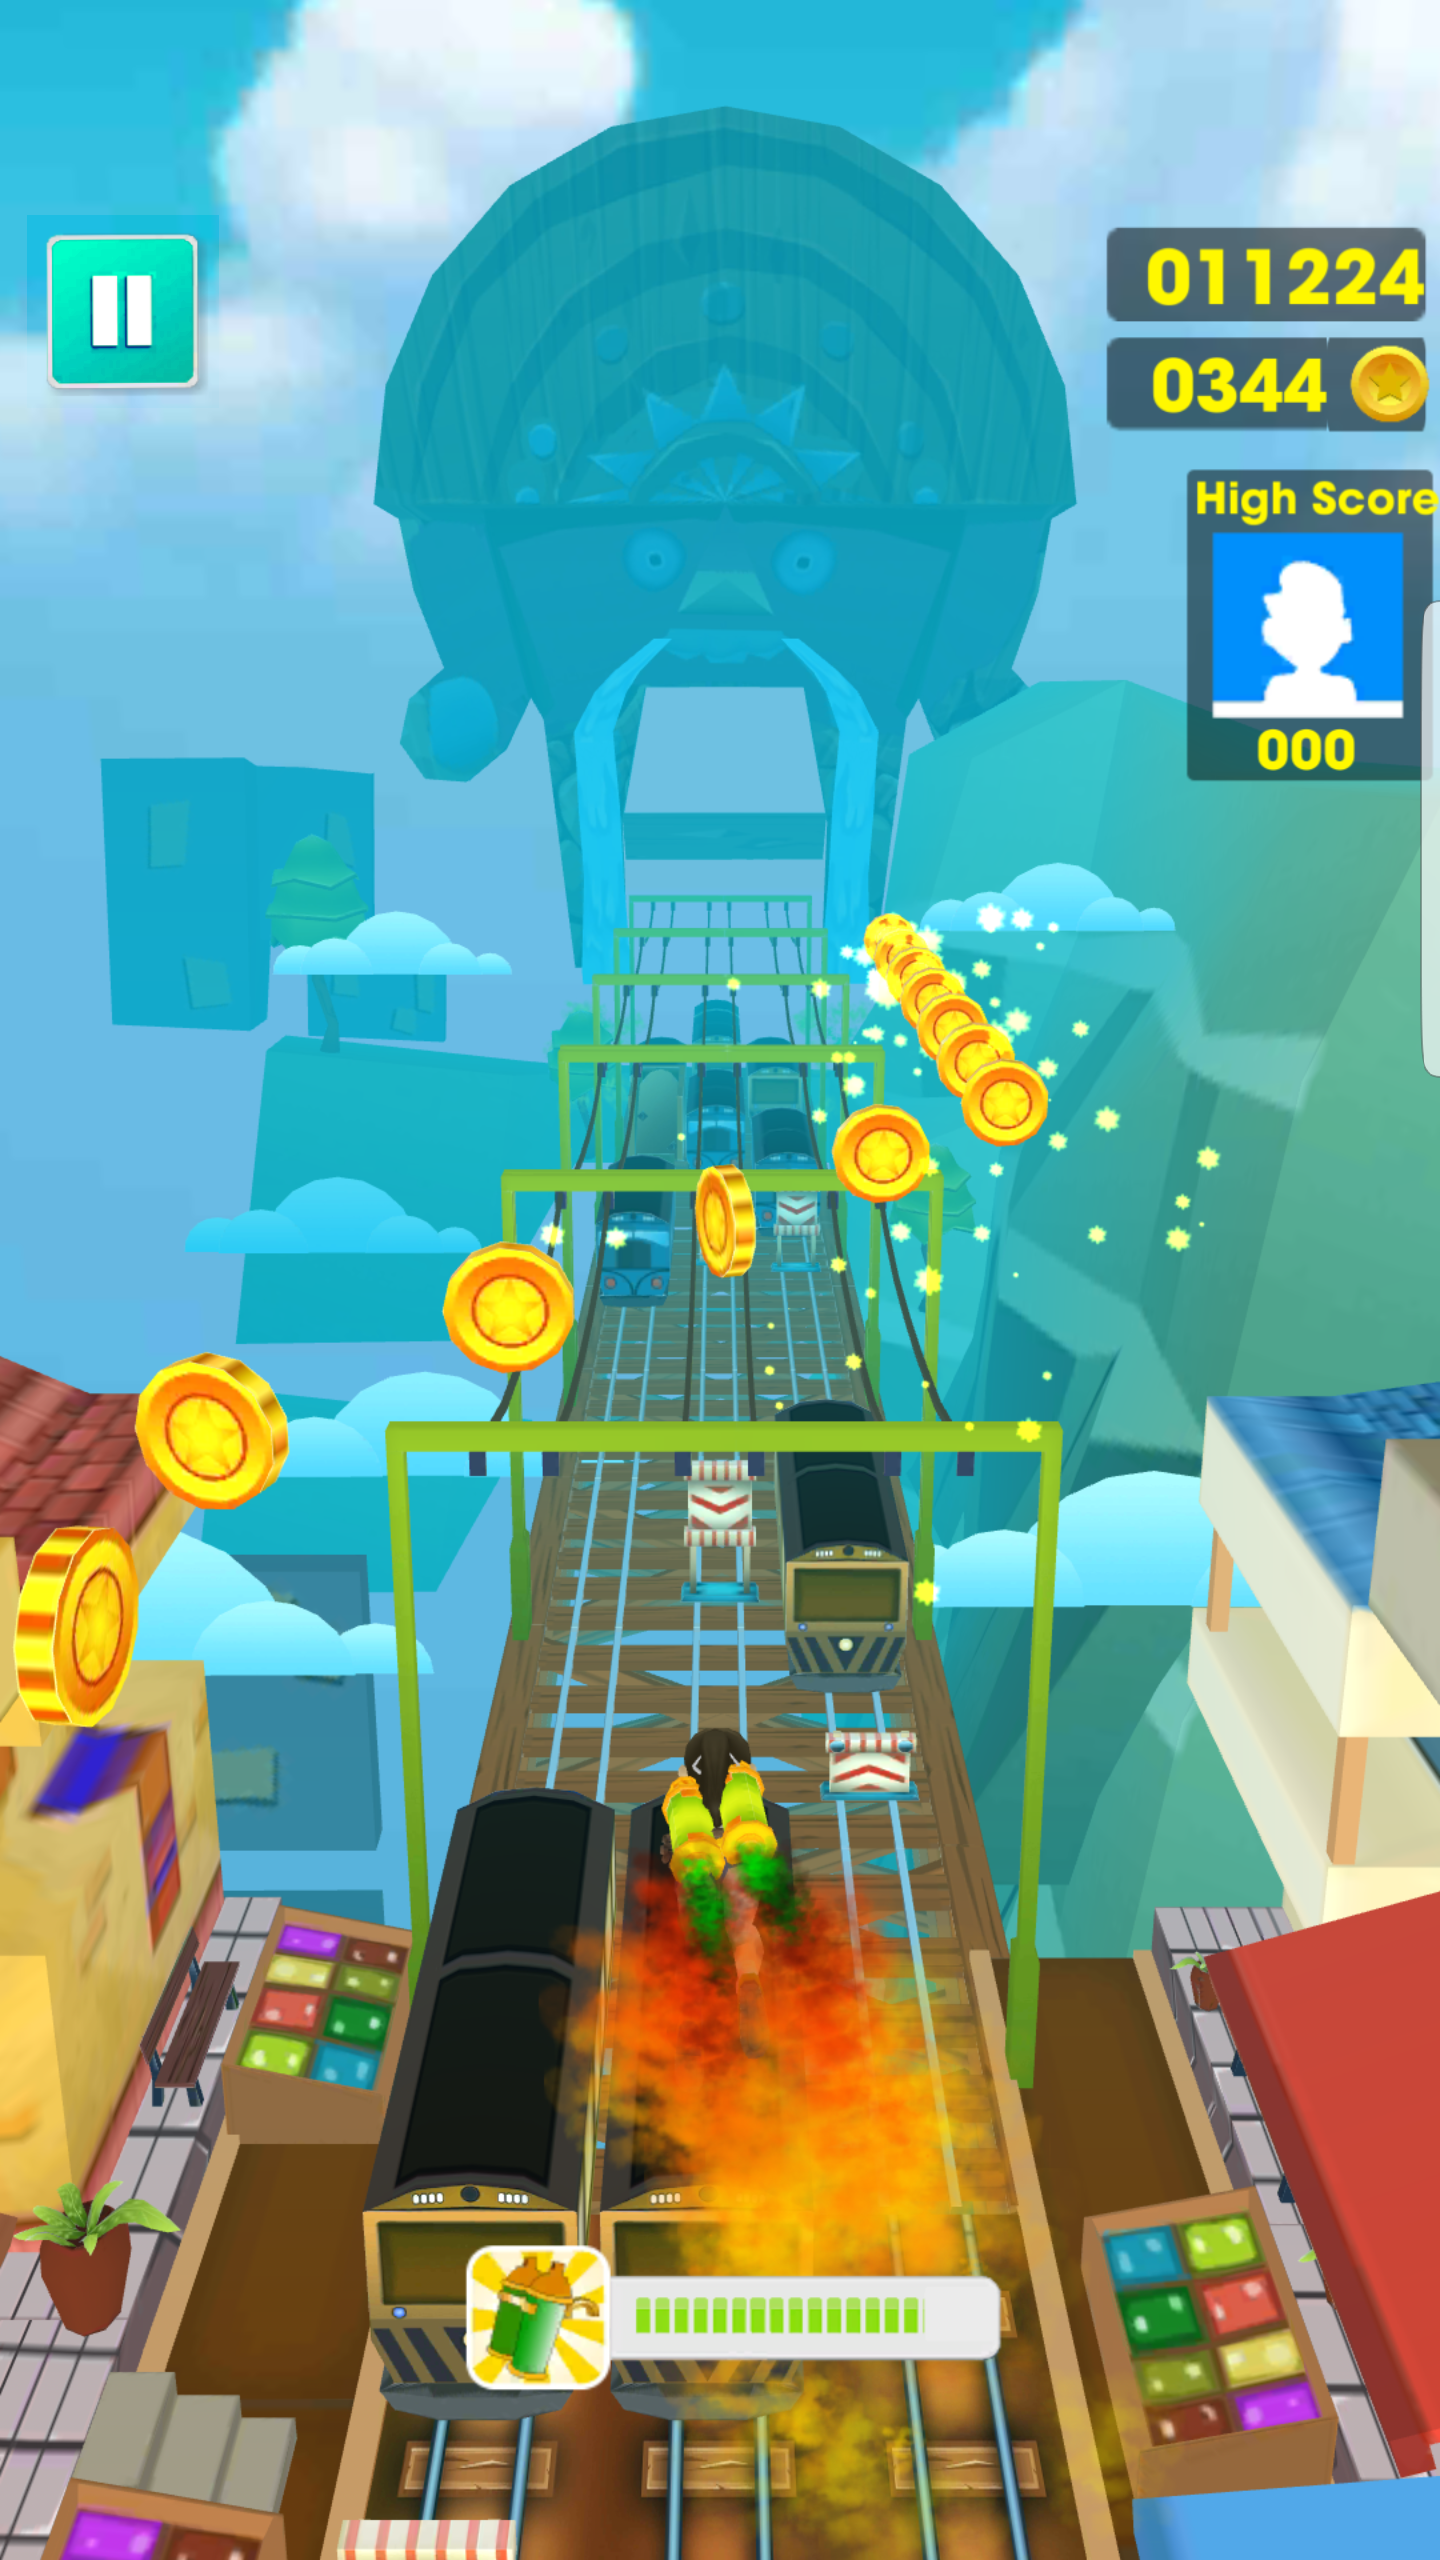 NEWS] Releases Subway Surfers for Kakao